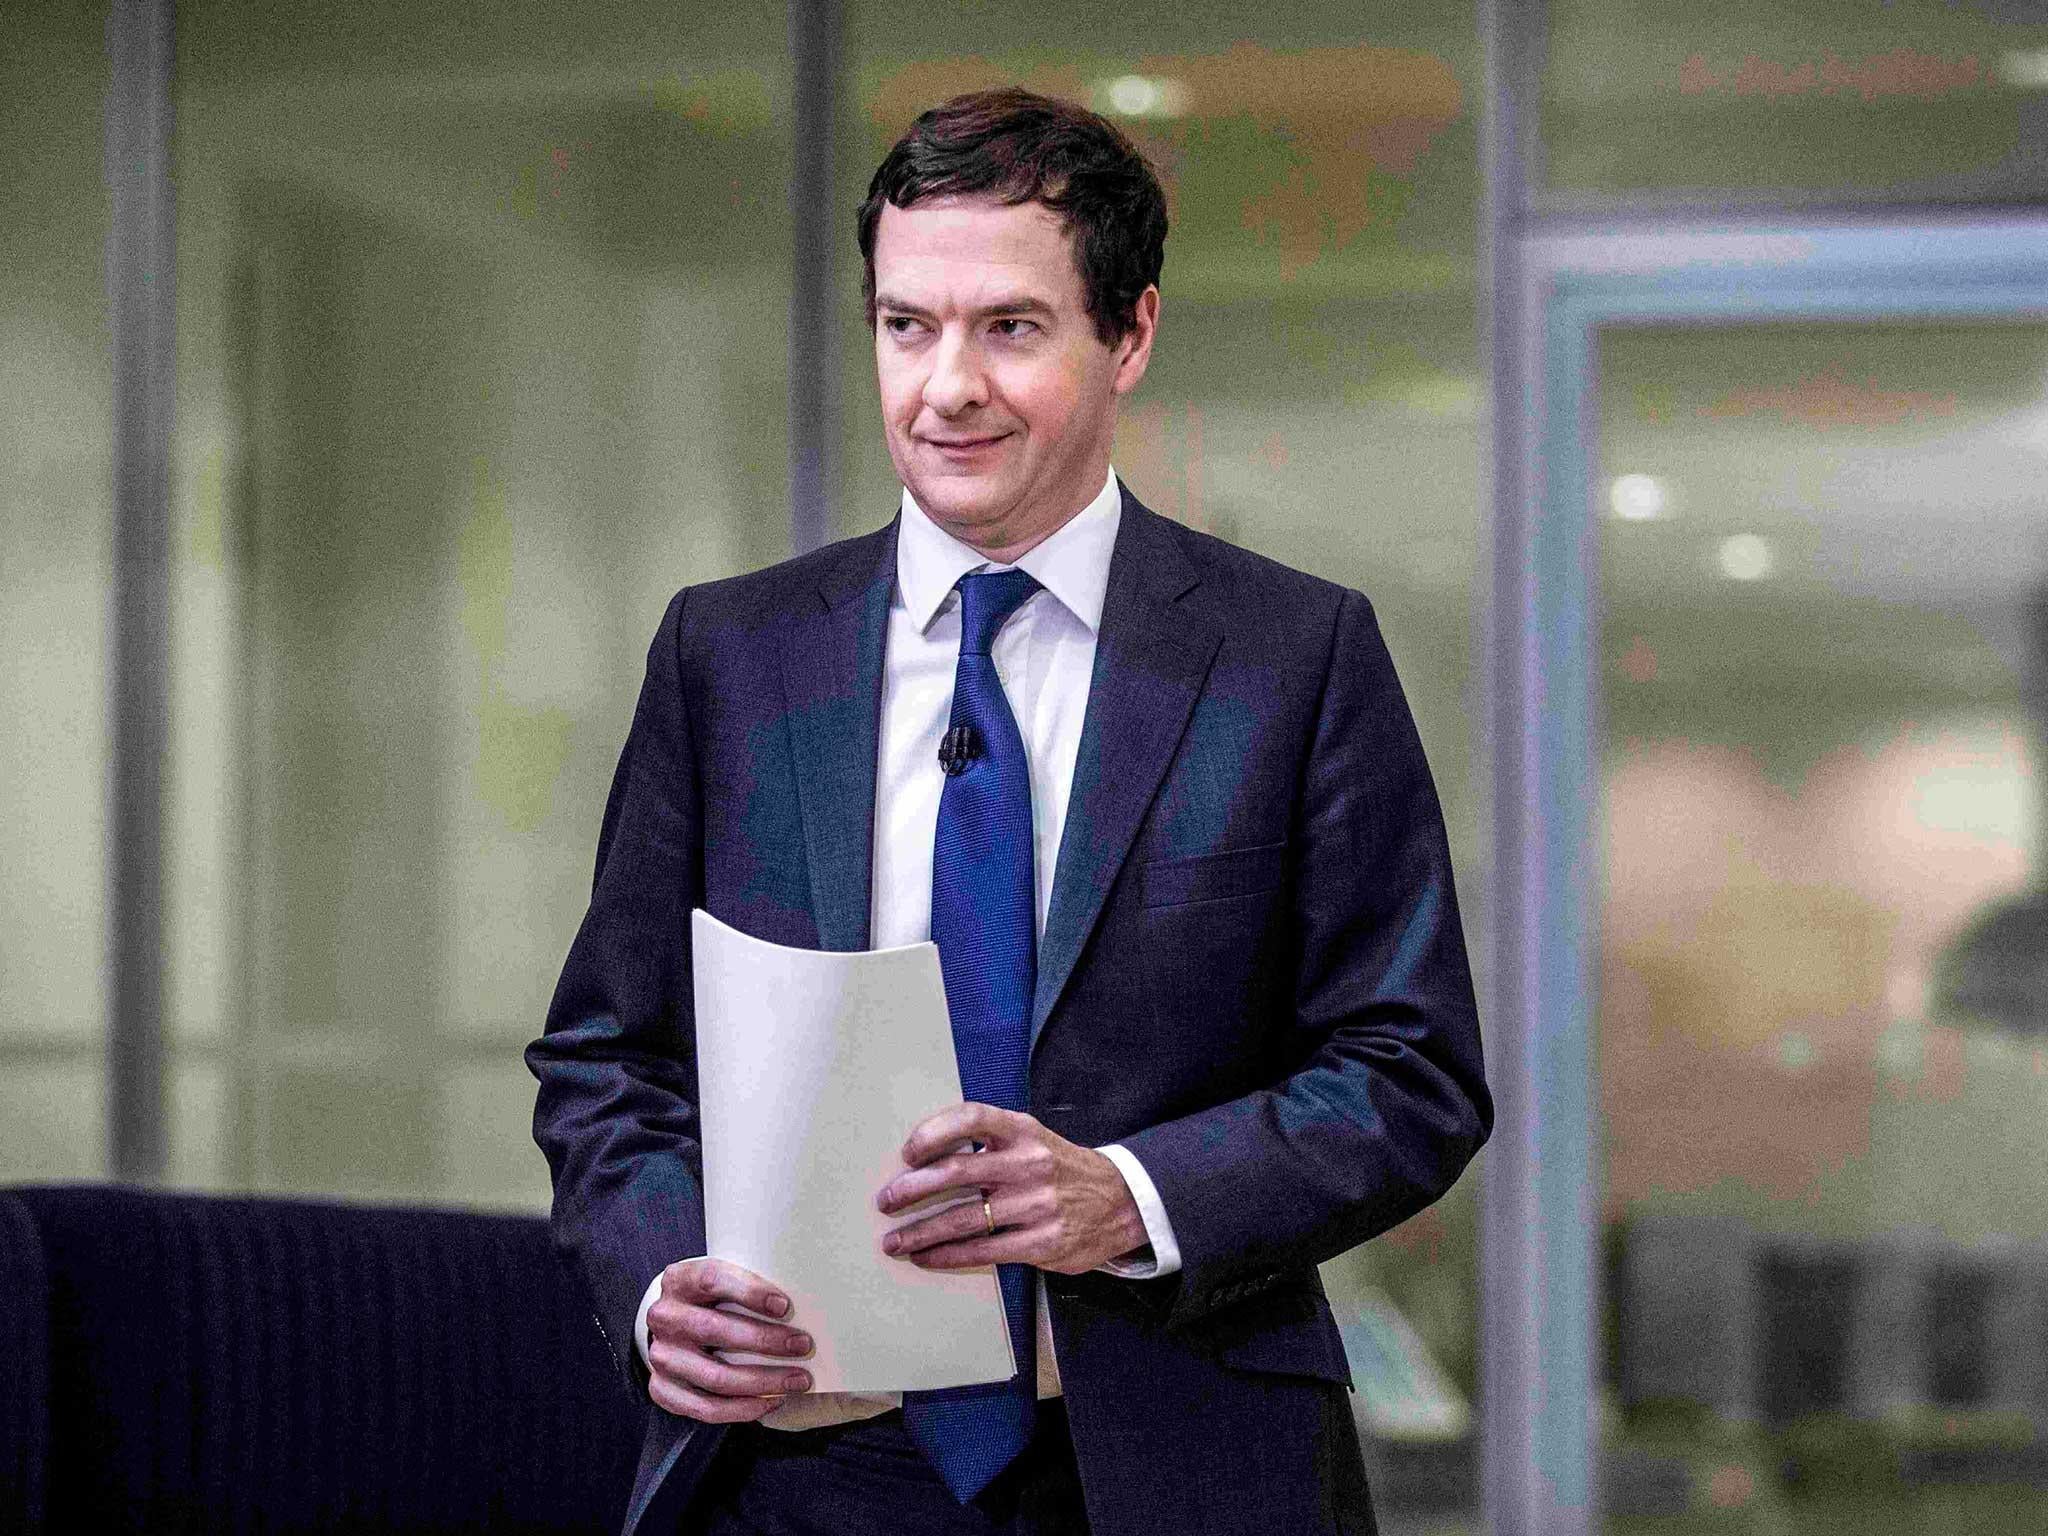 George Osborne has redoubled his efforts to build closer economic ties with the US after the UK